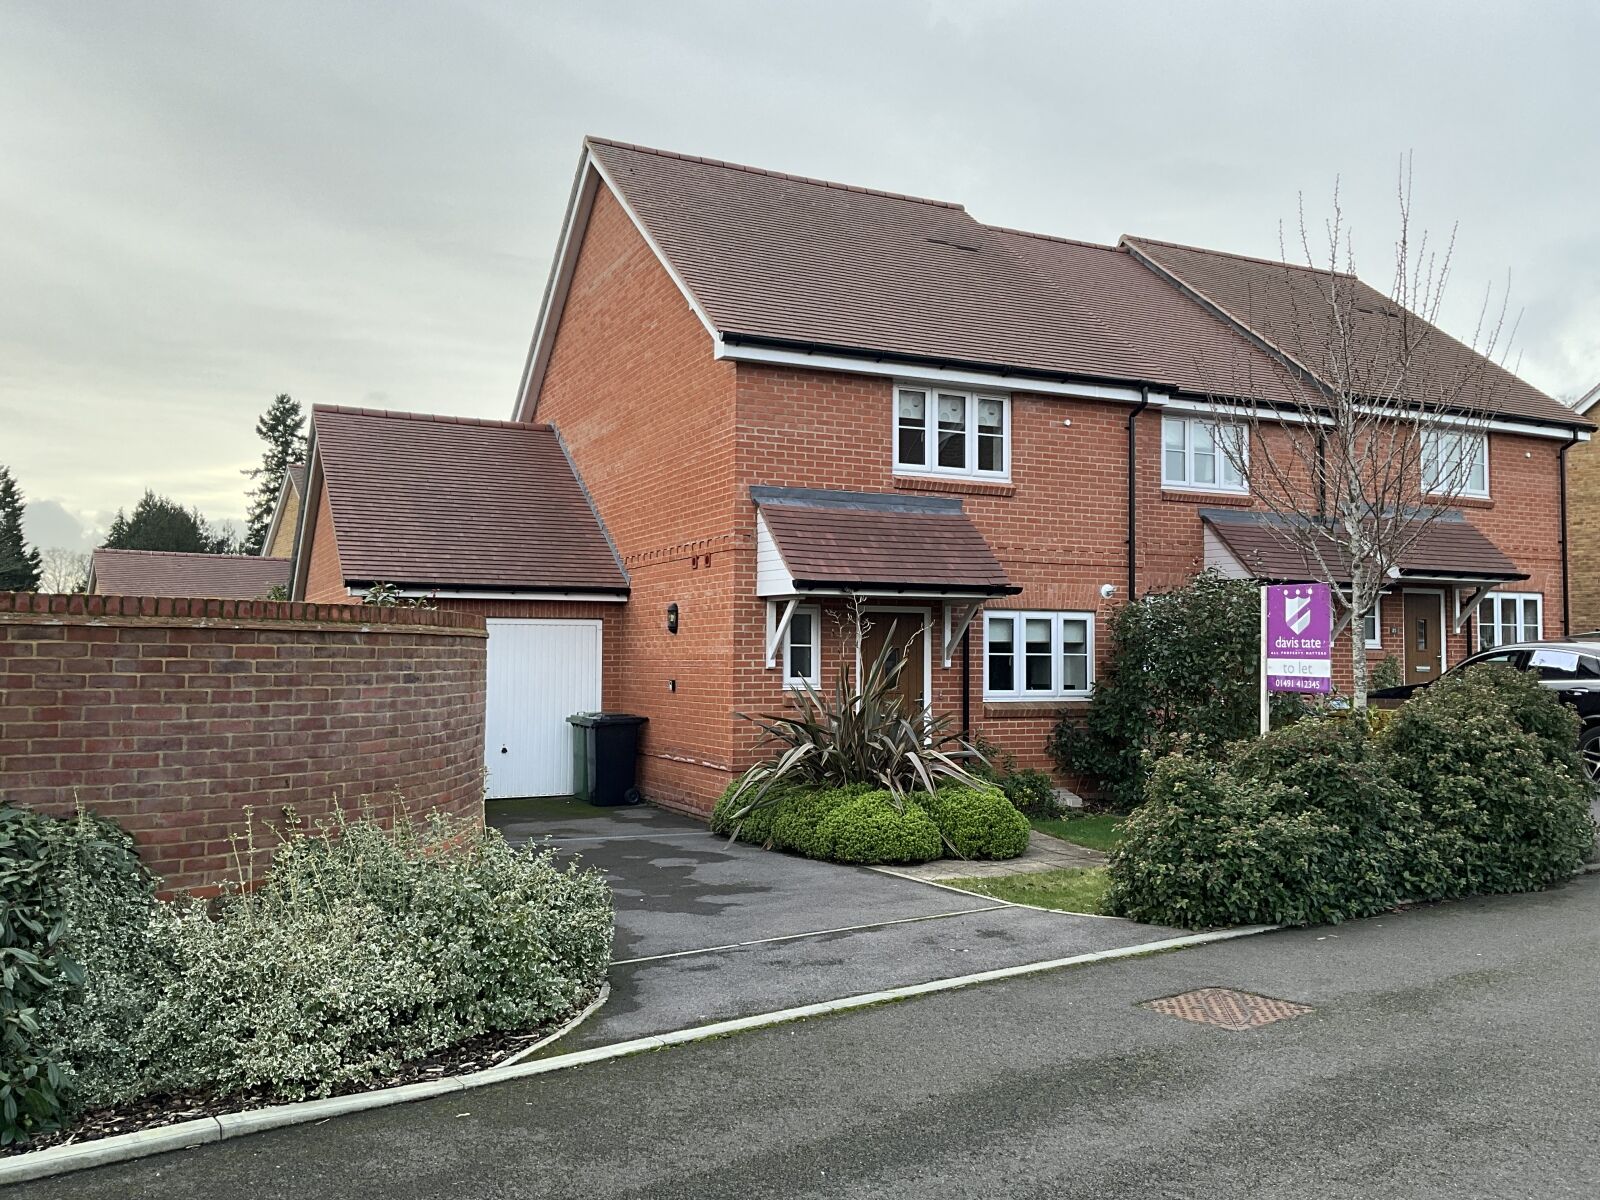 2 bedroom semi detached house to rent, Available now Bay Tree Rise, Sonning Common, RG4, main image